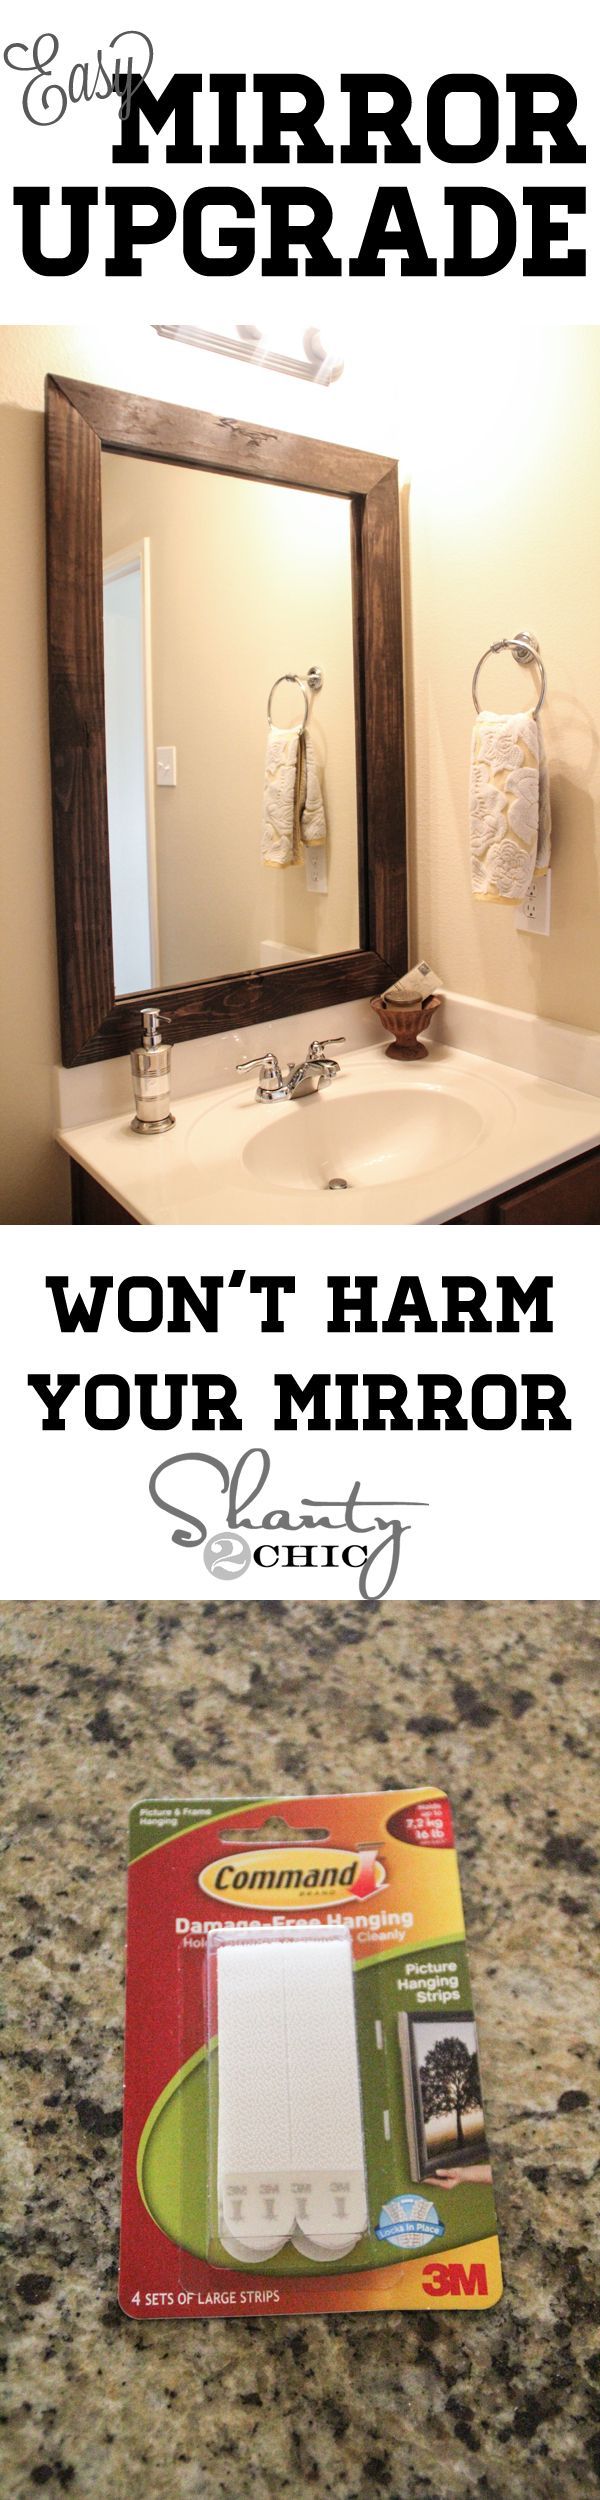 Great tutorial for updating a boring bathroom mirror!  I need this!